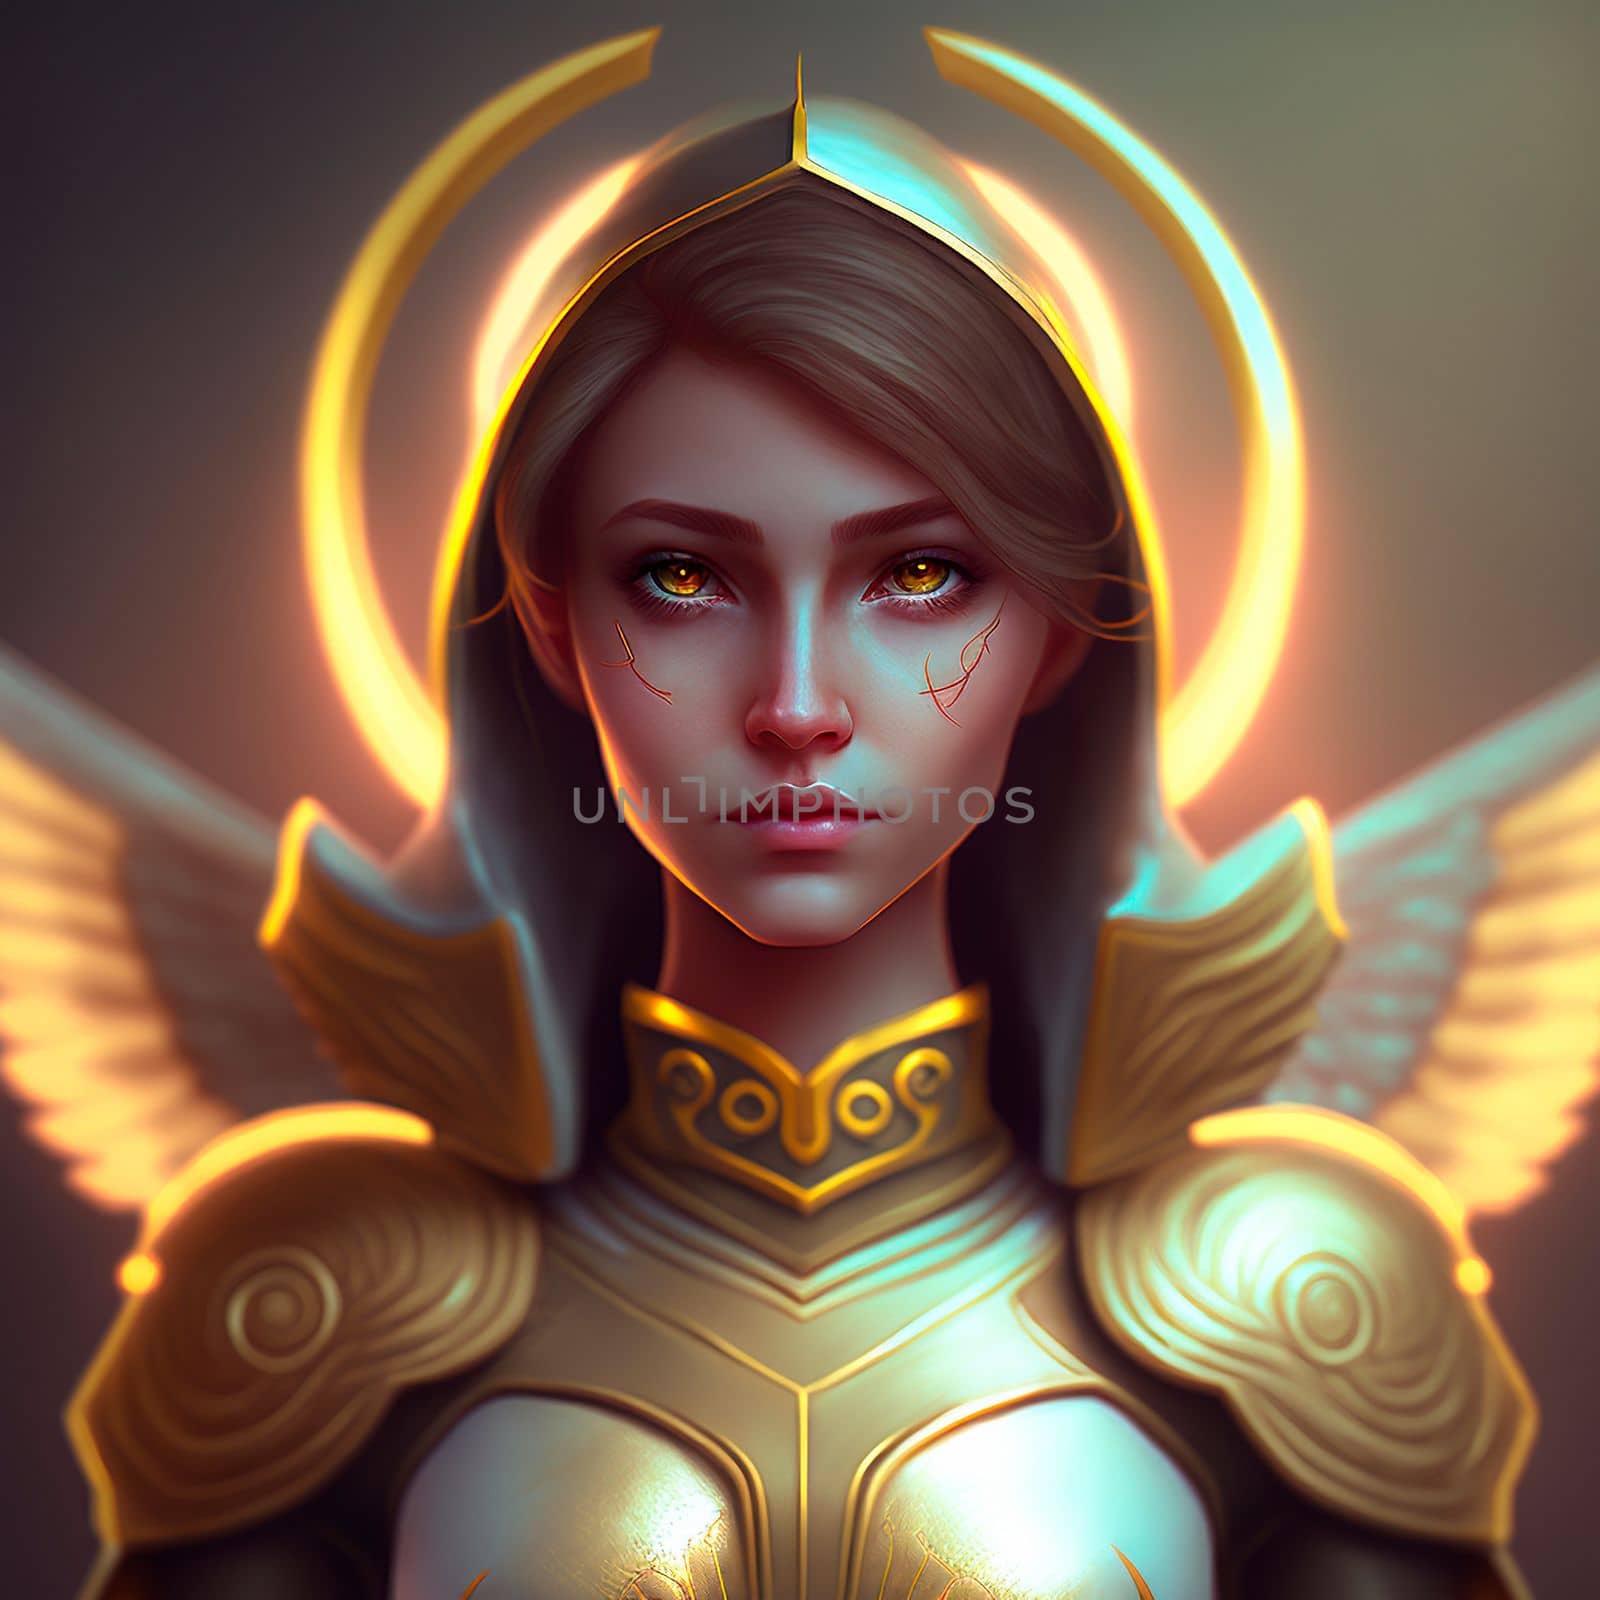 Mysterious angel woman with a halo and golden armor. High quality photo